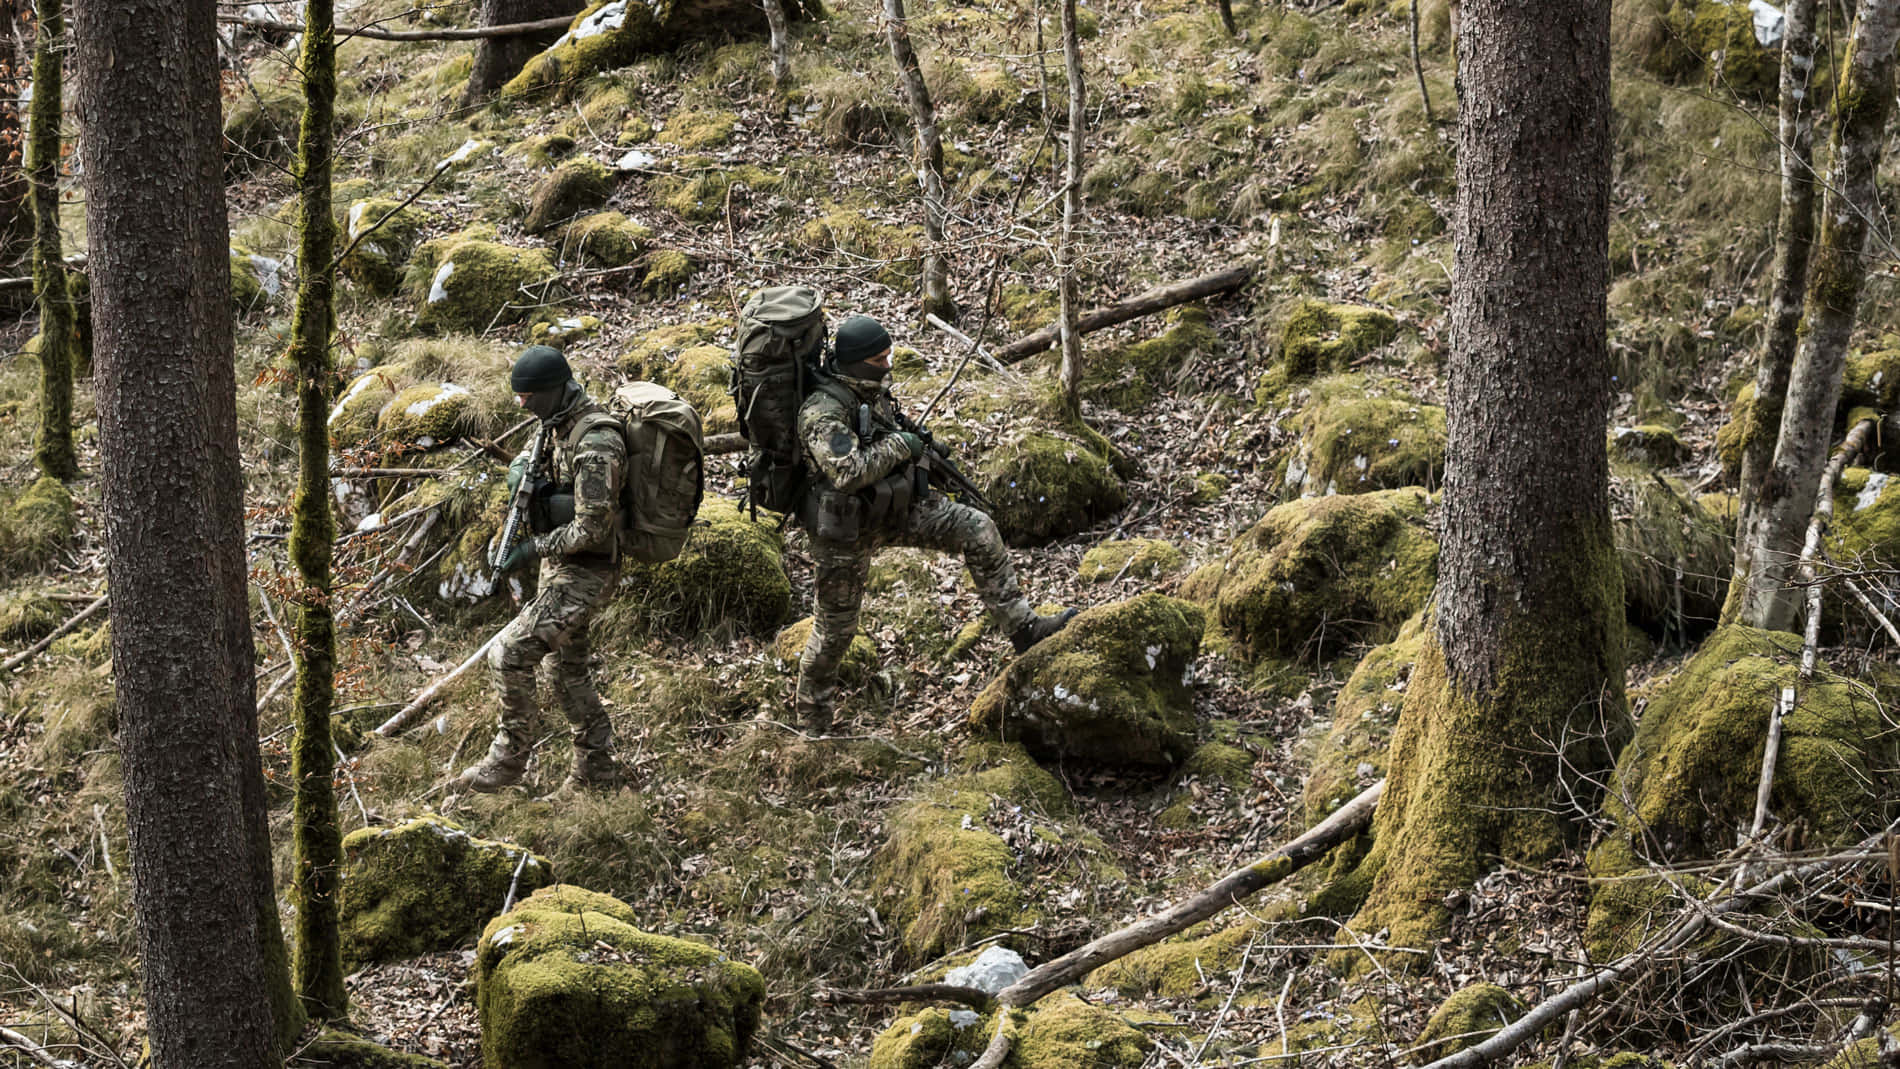 Blend in with nature while standing out with Camo